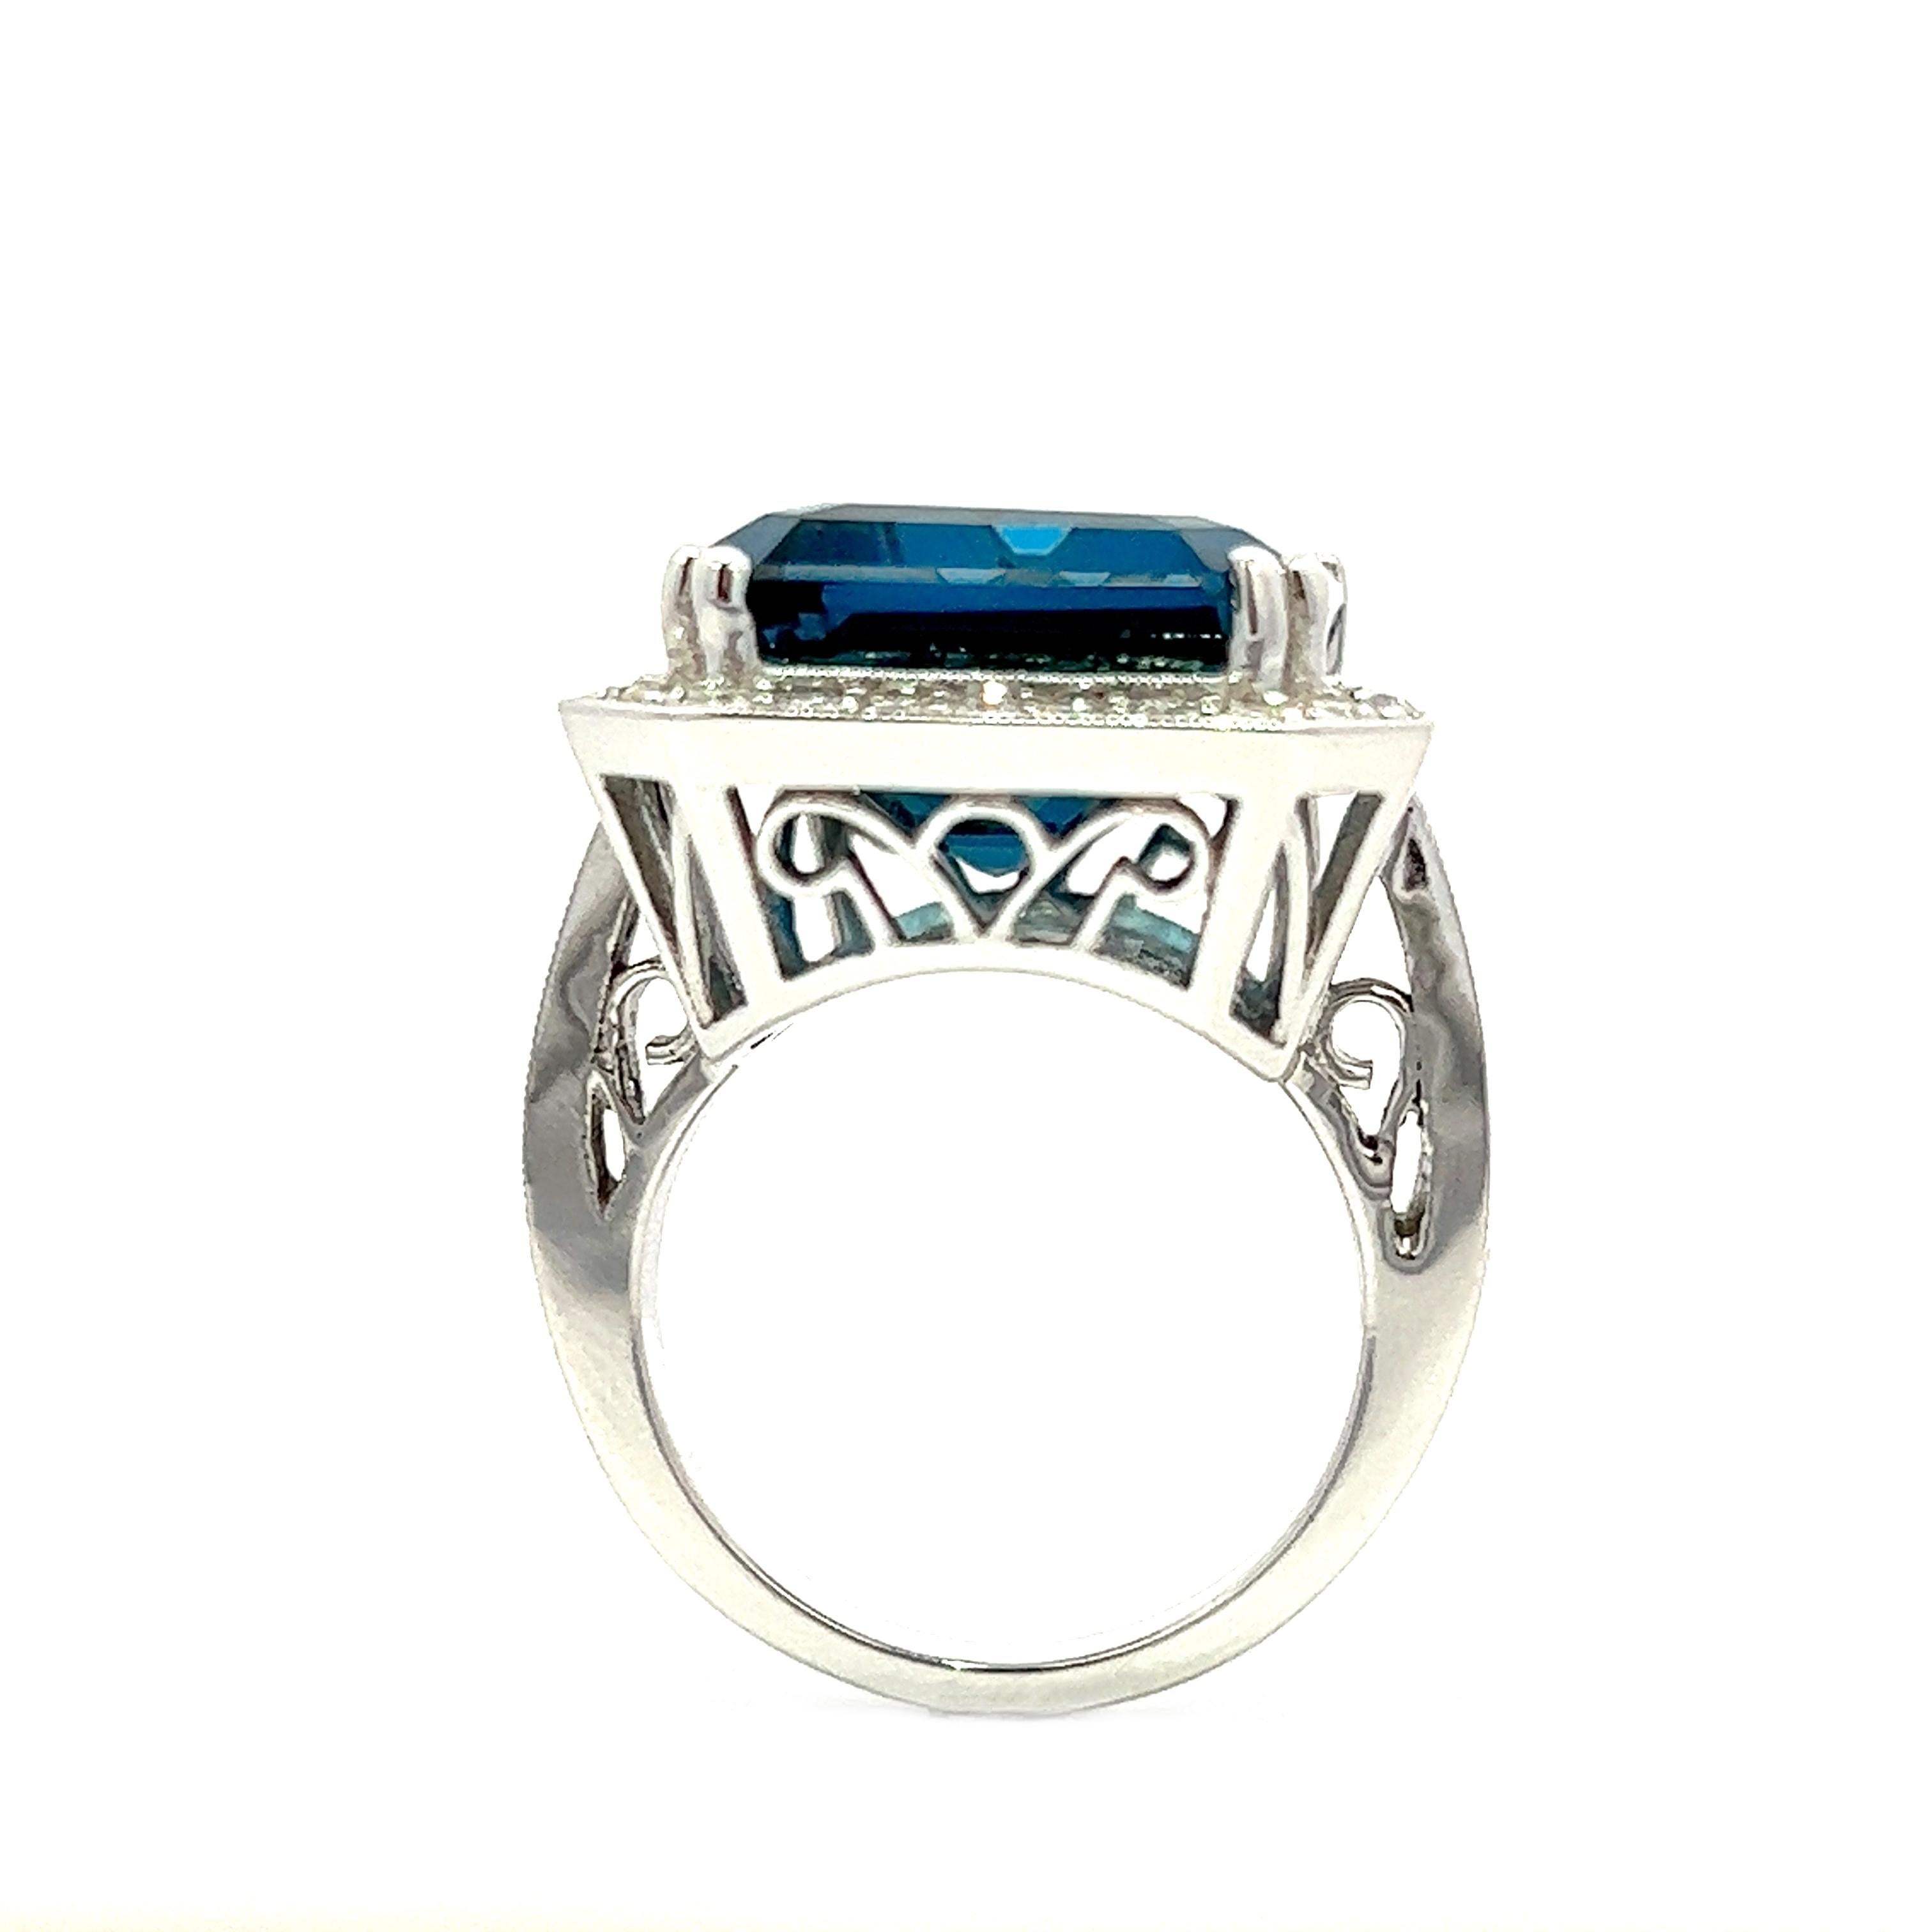 28.17CT Total Weight London Blue Topaz & Diamonds Ring, set in 14KW For Sale 2